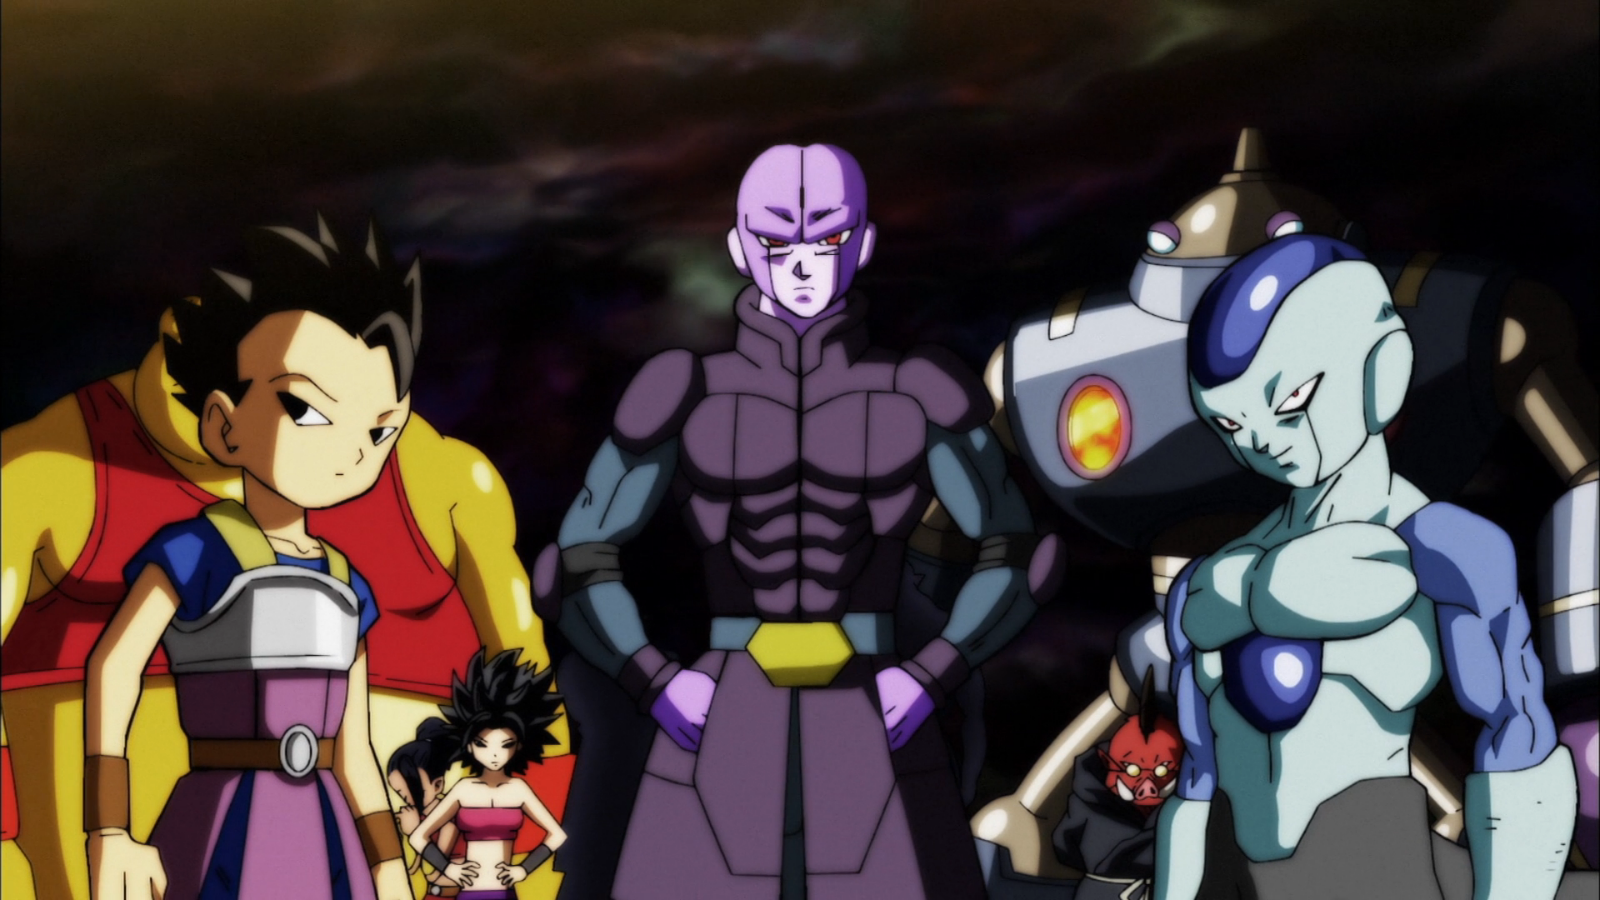 Image - Universe 6 Team (Dragon Ball Super Ep 96).png | AnimeVice Wiki | FANDOM powered by Wikia